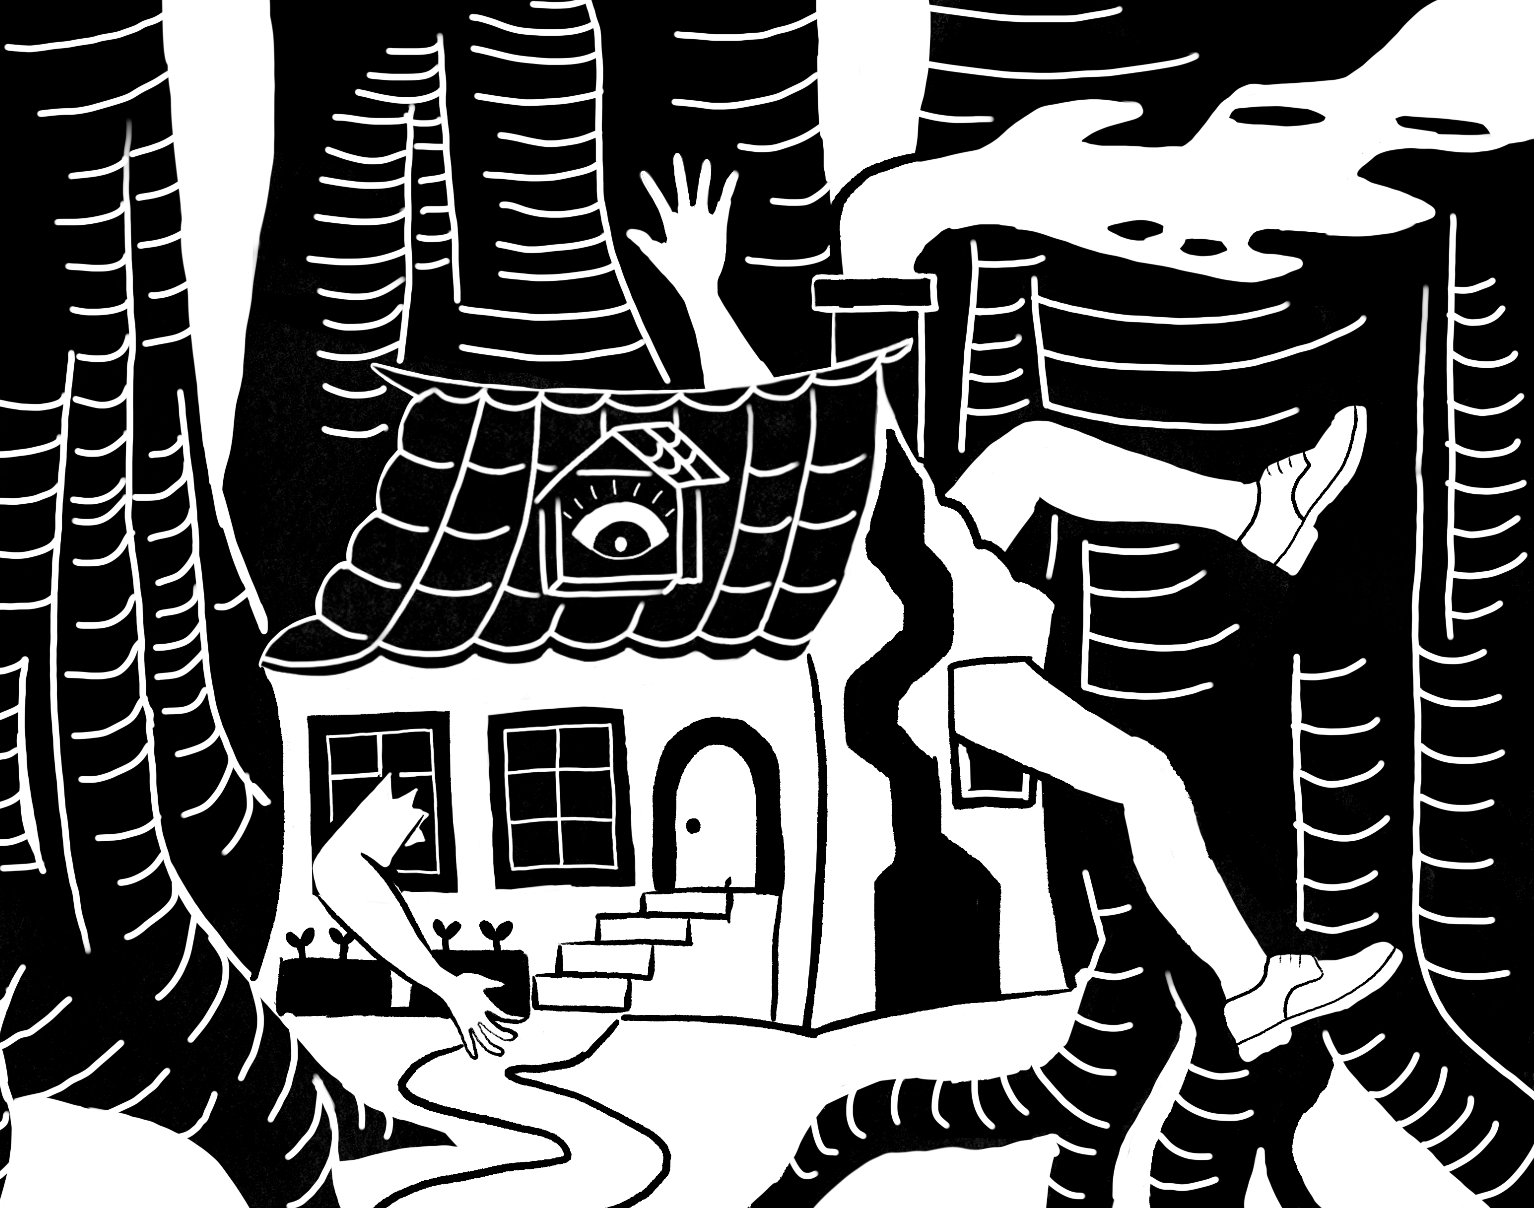 Work in progress showing forest with  girl in miniature house in with arms and legs sticking out of windows